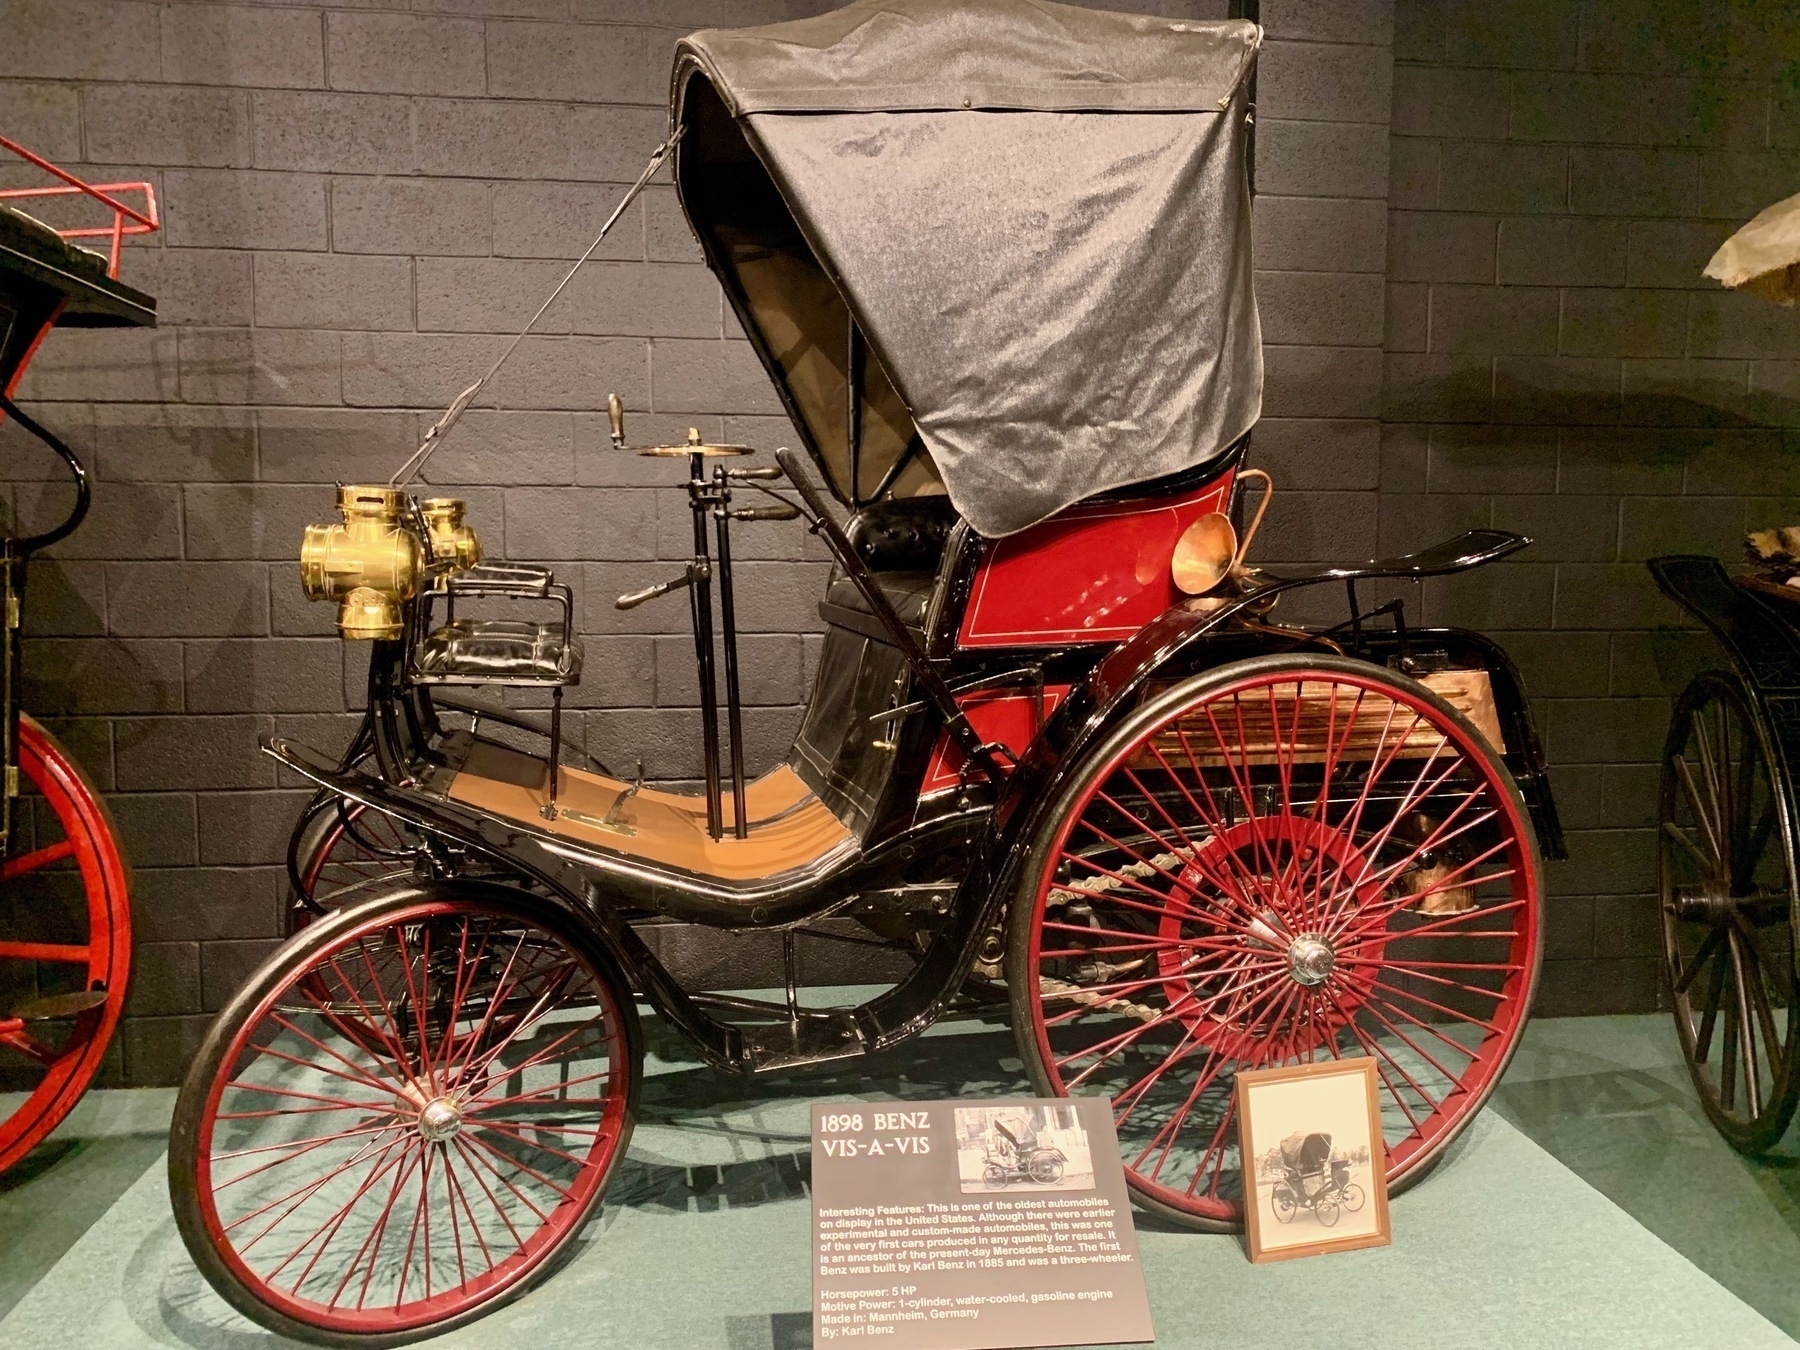 Photo of an 1898 Benz horseless carriage, as a museum exhibit.